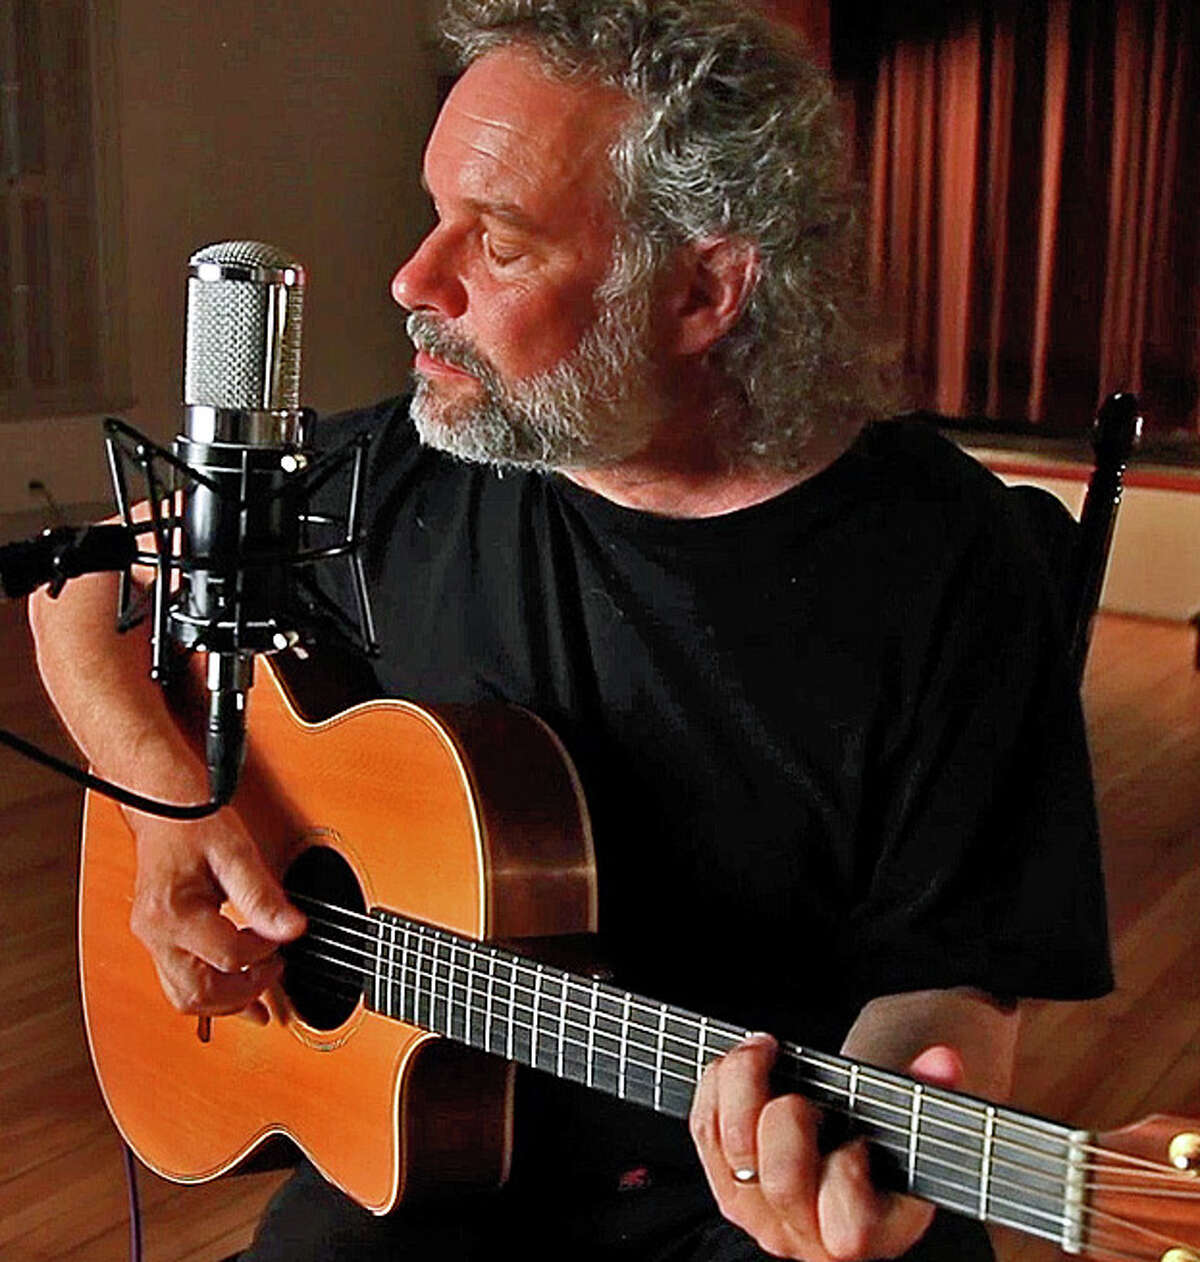 Folk singer John Gorka will perform March 12 at Voices Cafe of the Unitarian Church in Westport.